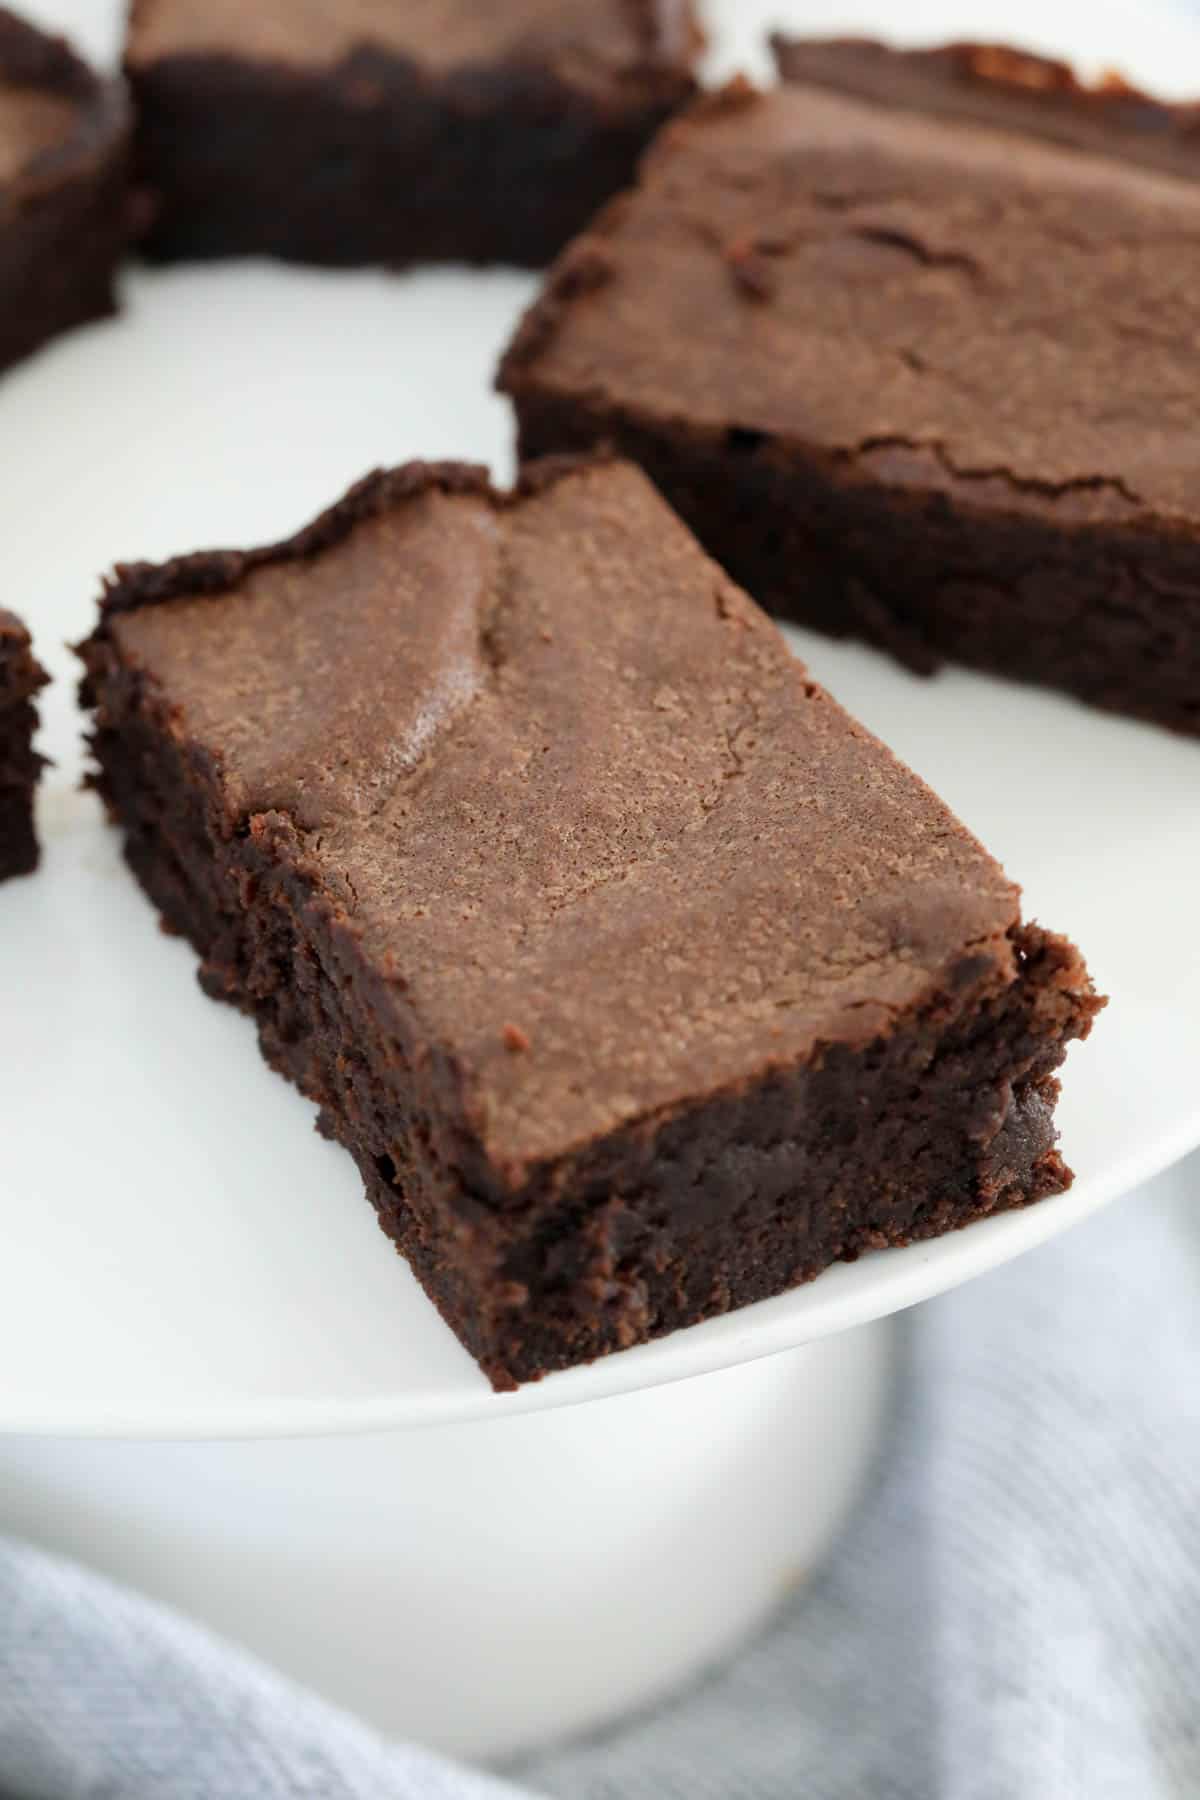 A flakey topped brownie on a plate.